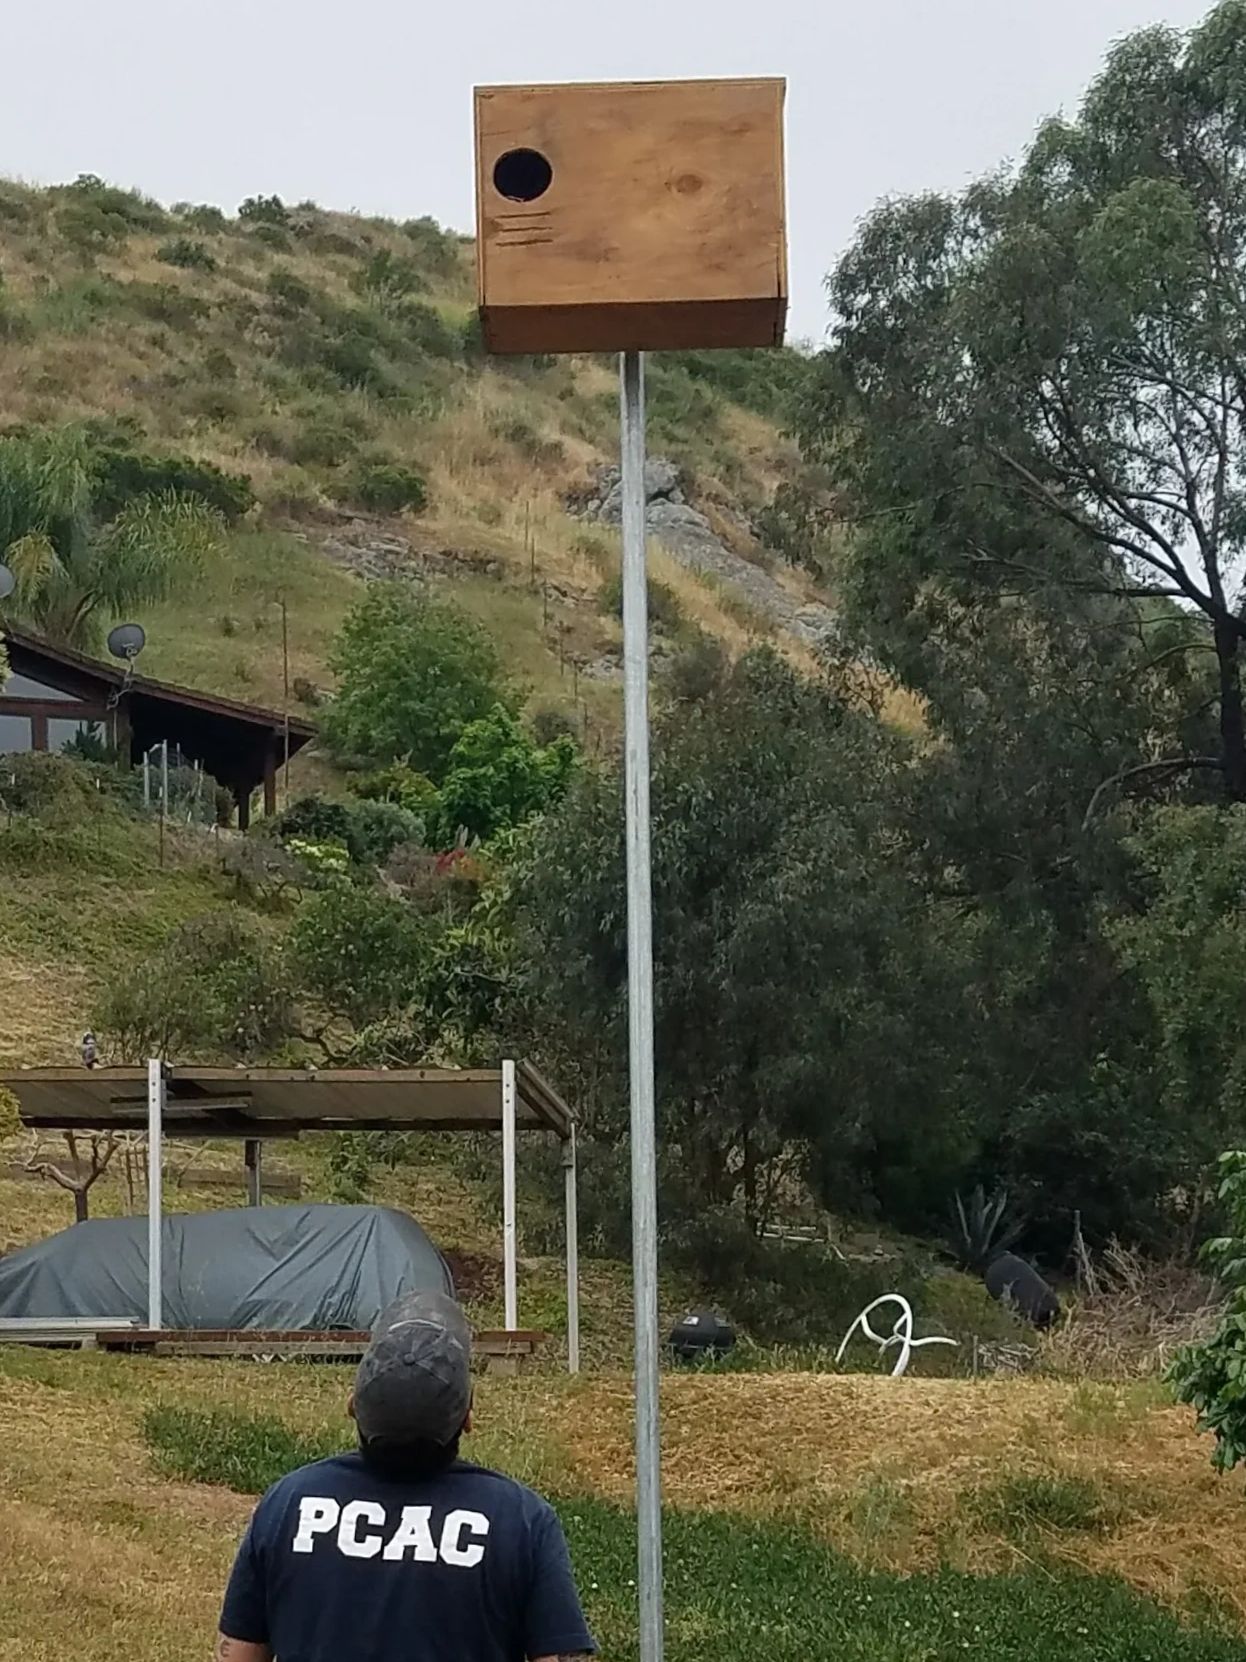 A wood owl box on top of a pole. The installer with "PCAC" on the back of his shirt looks up at it 